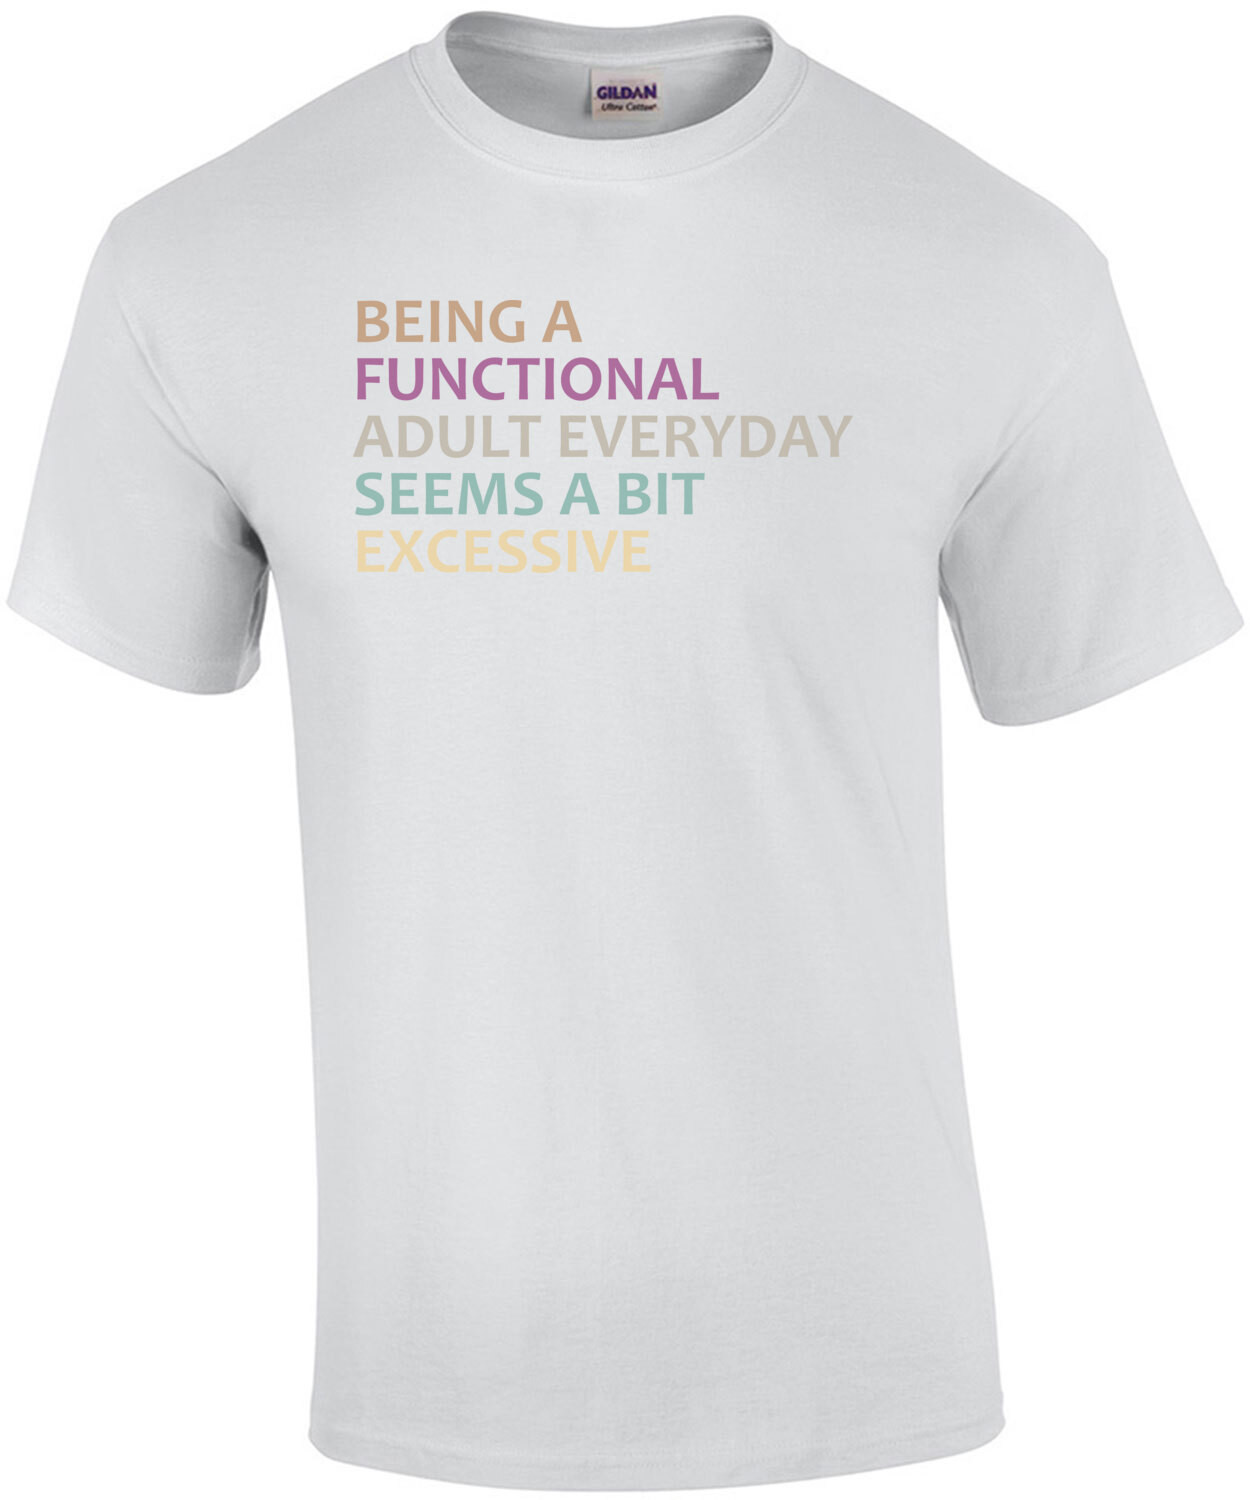 BEING A FUNCTIONAL ADULT EVERYDAY SEEMS A BIT EXCESSIVE - Funny Sarcastic T-Shirt